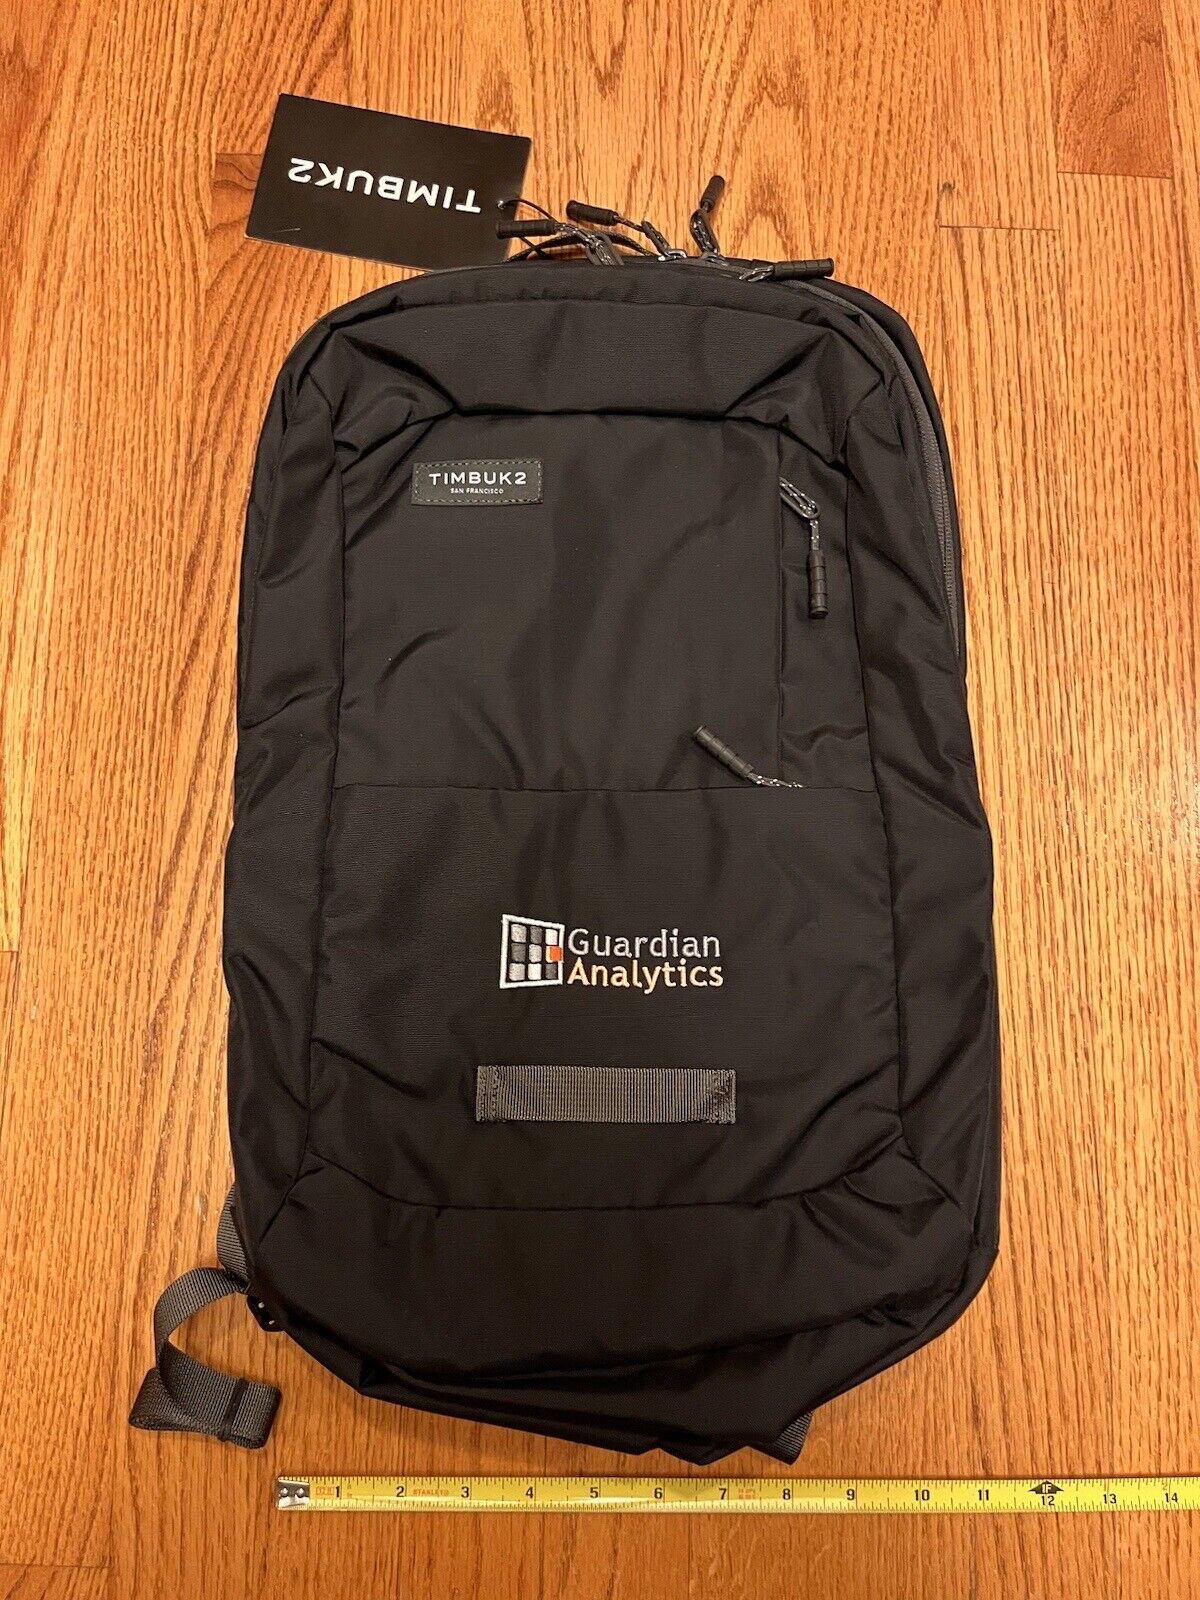 Timbuk2 Parkside OS Backpack School Laptop Bag Black NEW w/Tags NWT 15\